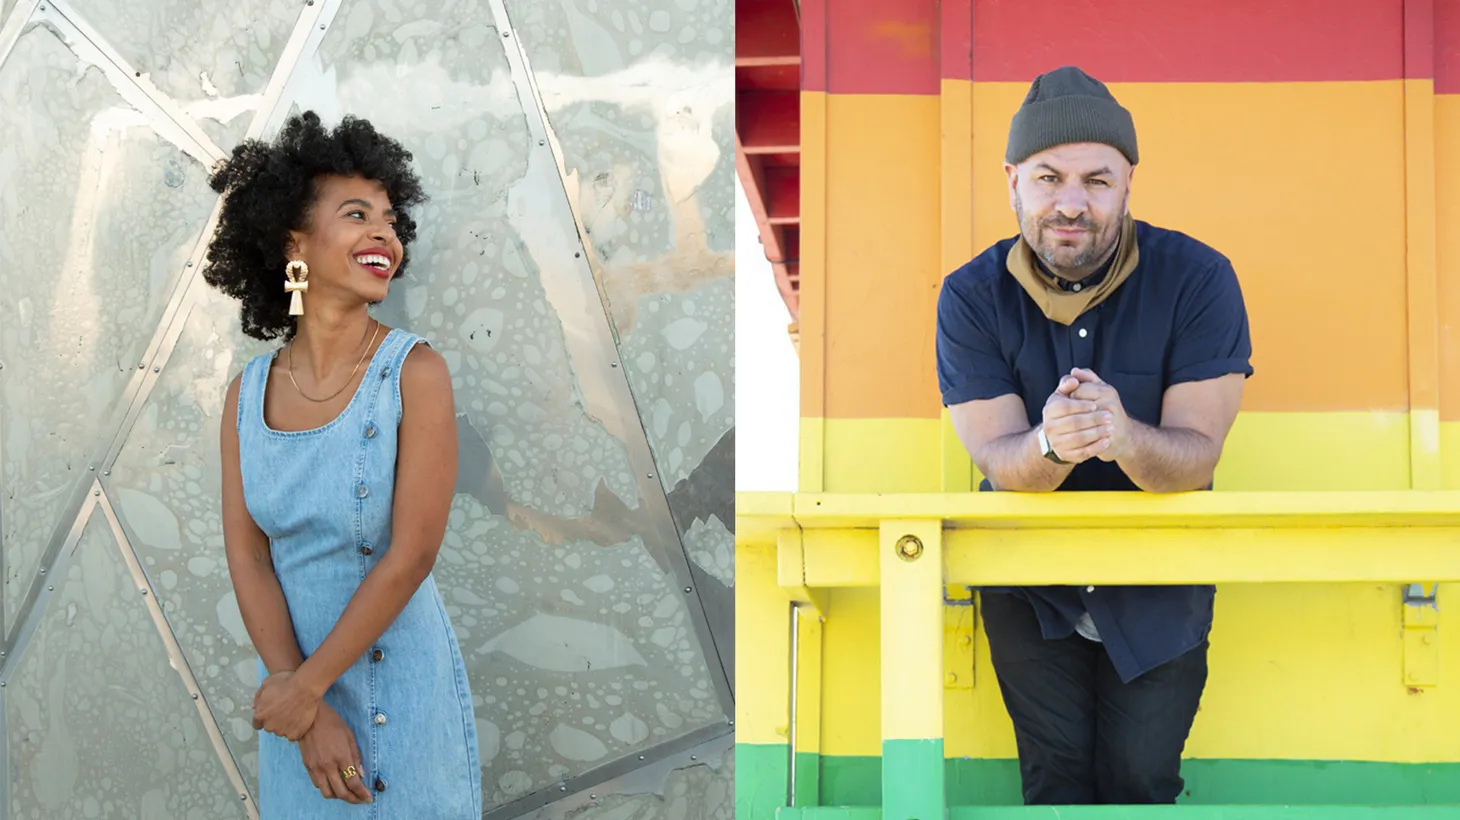 KCRW's signature music program features new releases, live performances, and artist interviews